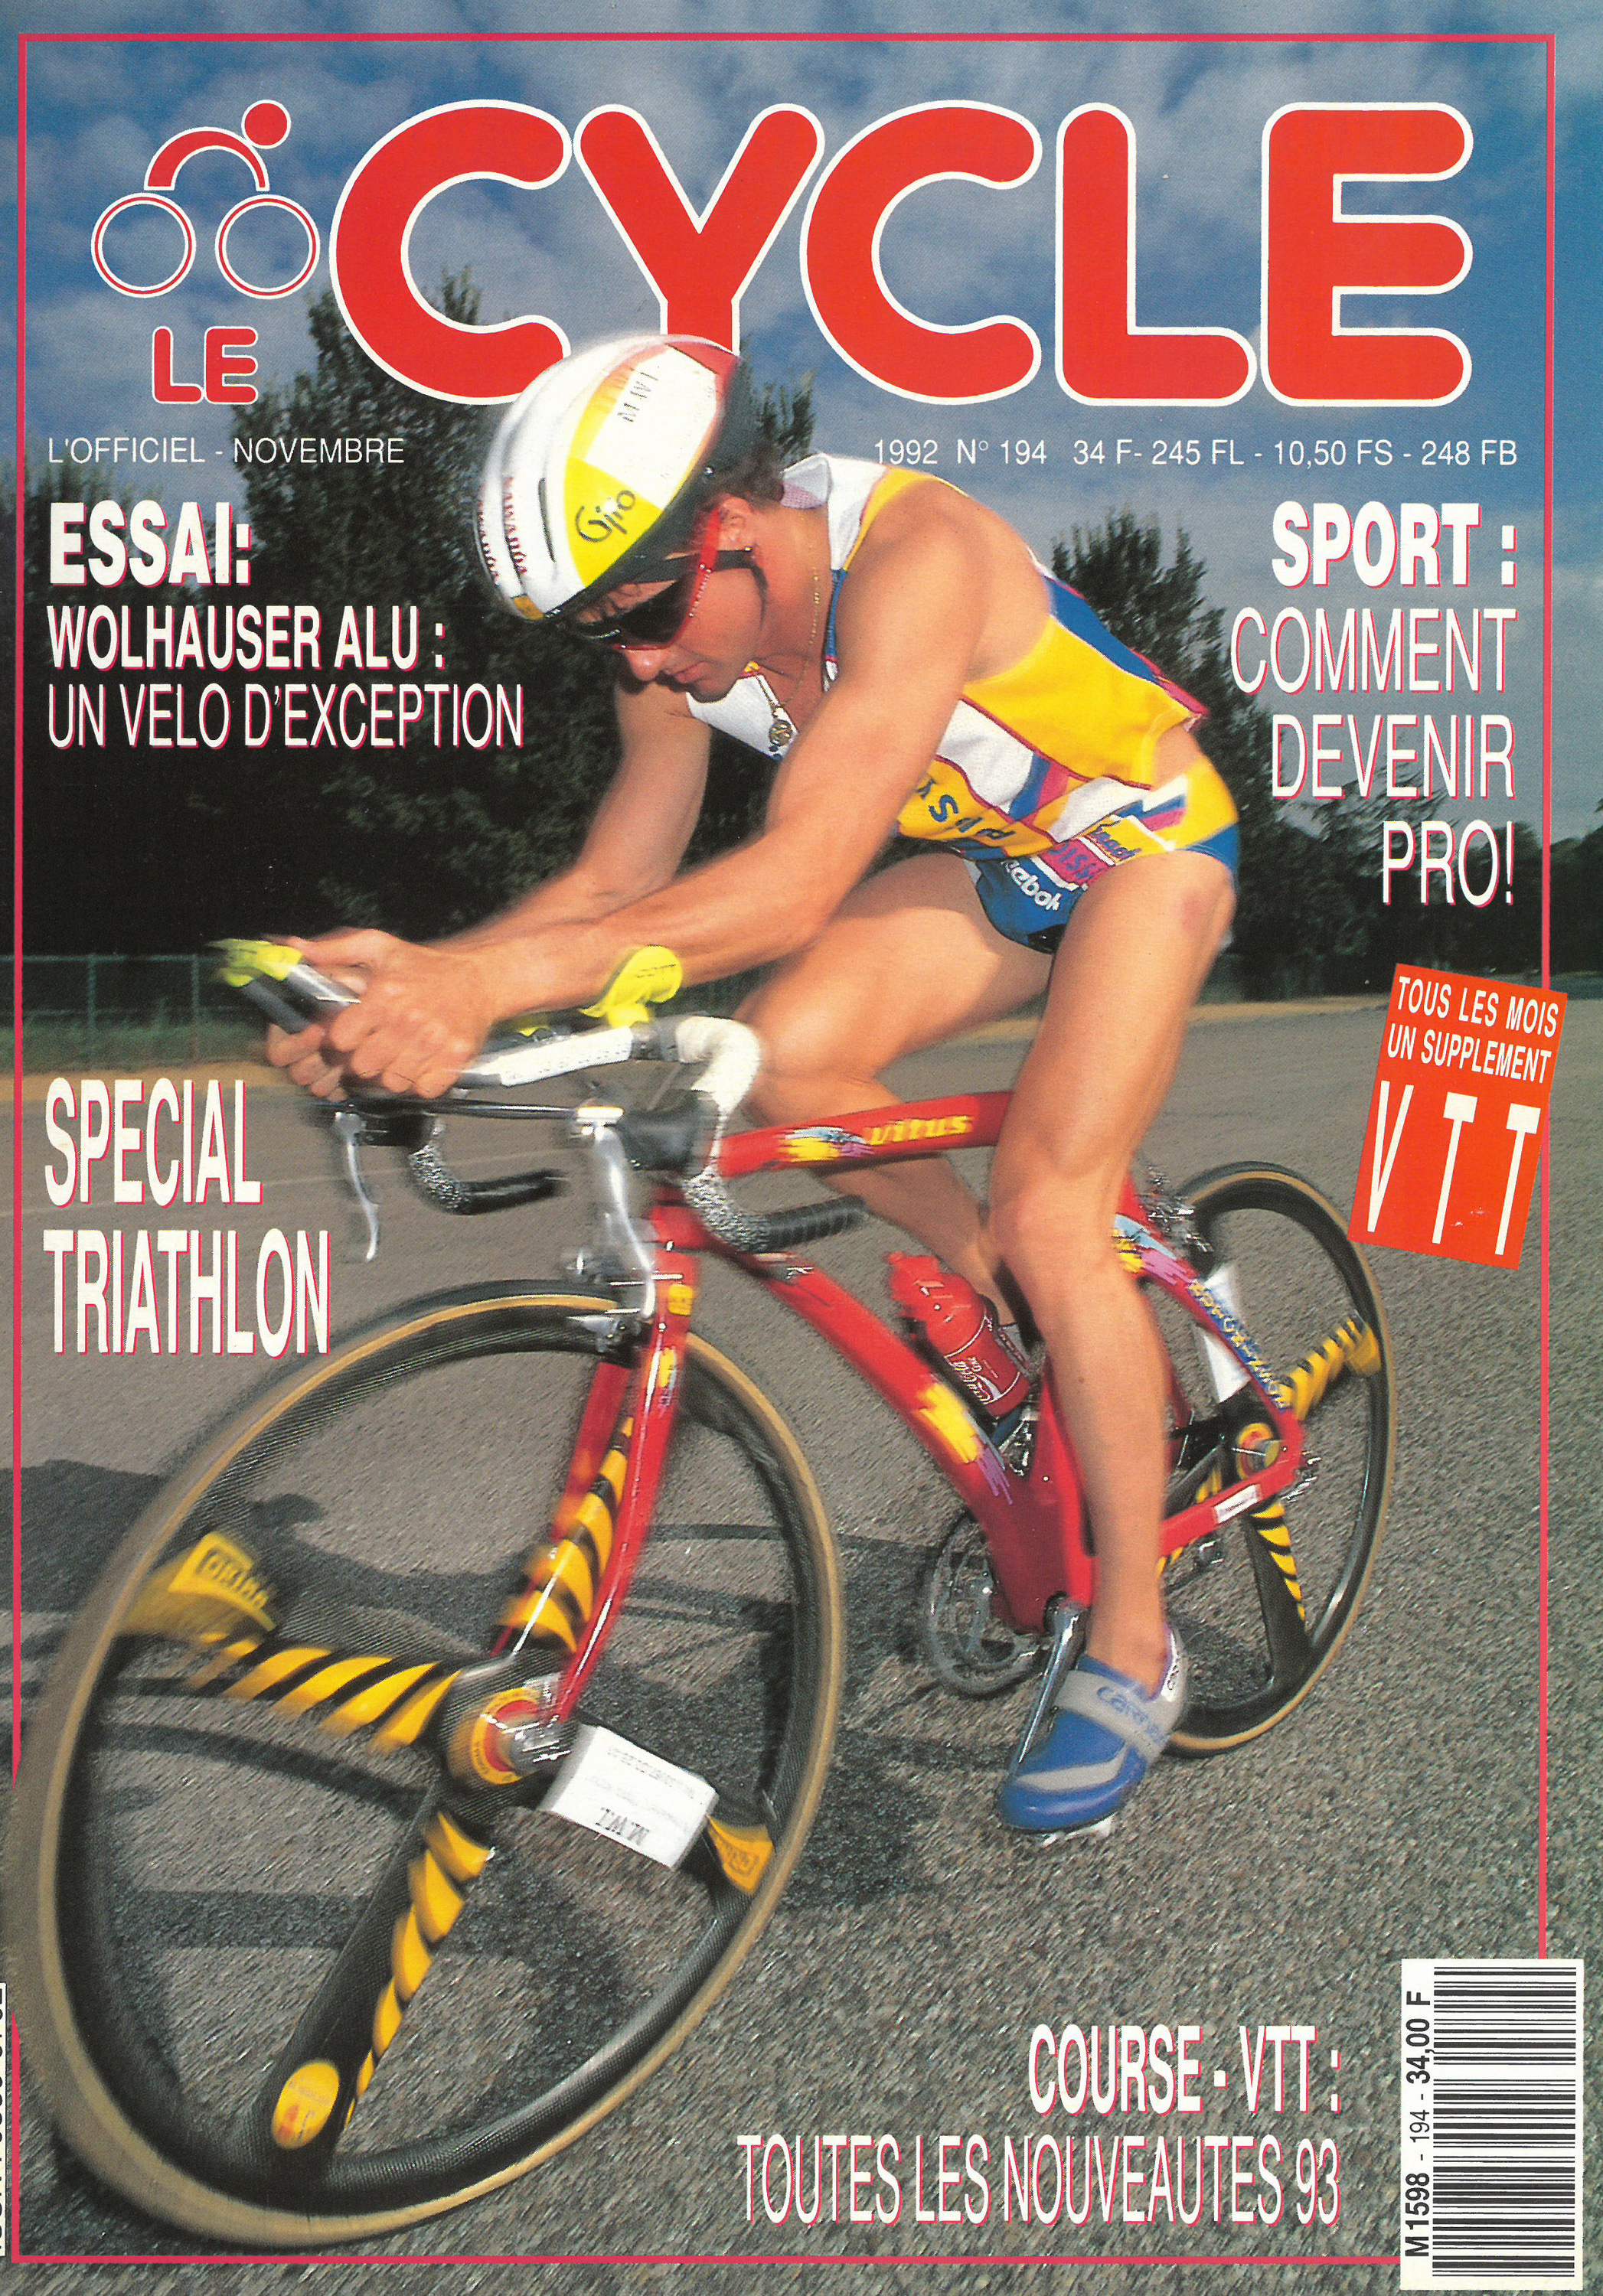 LE CYCLE 92 N194 VELOCYCLO